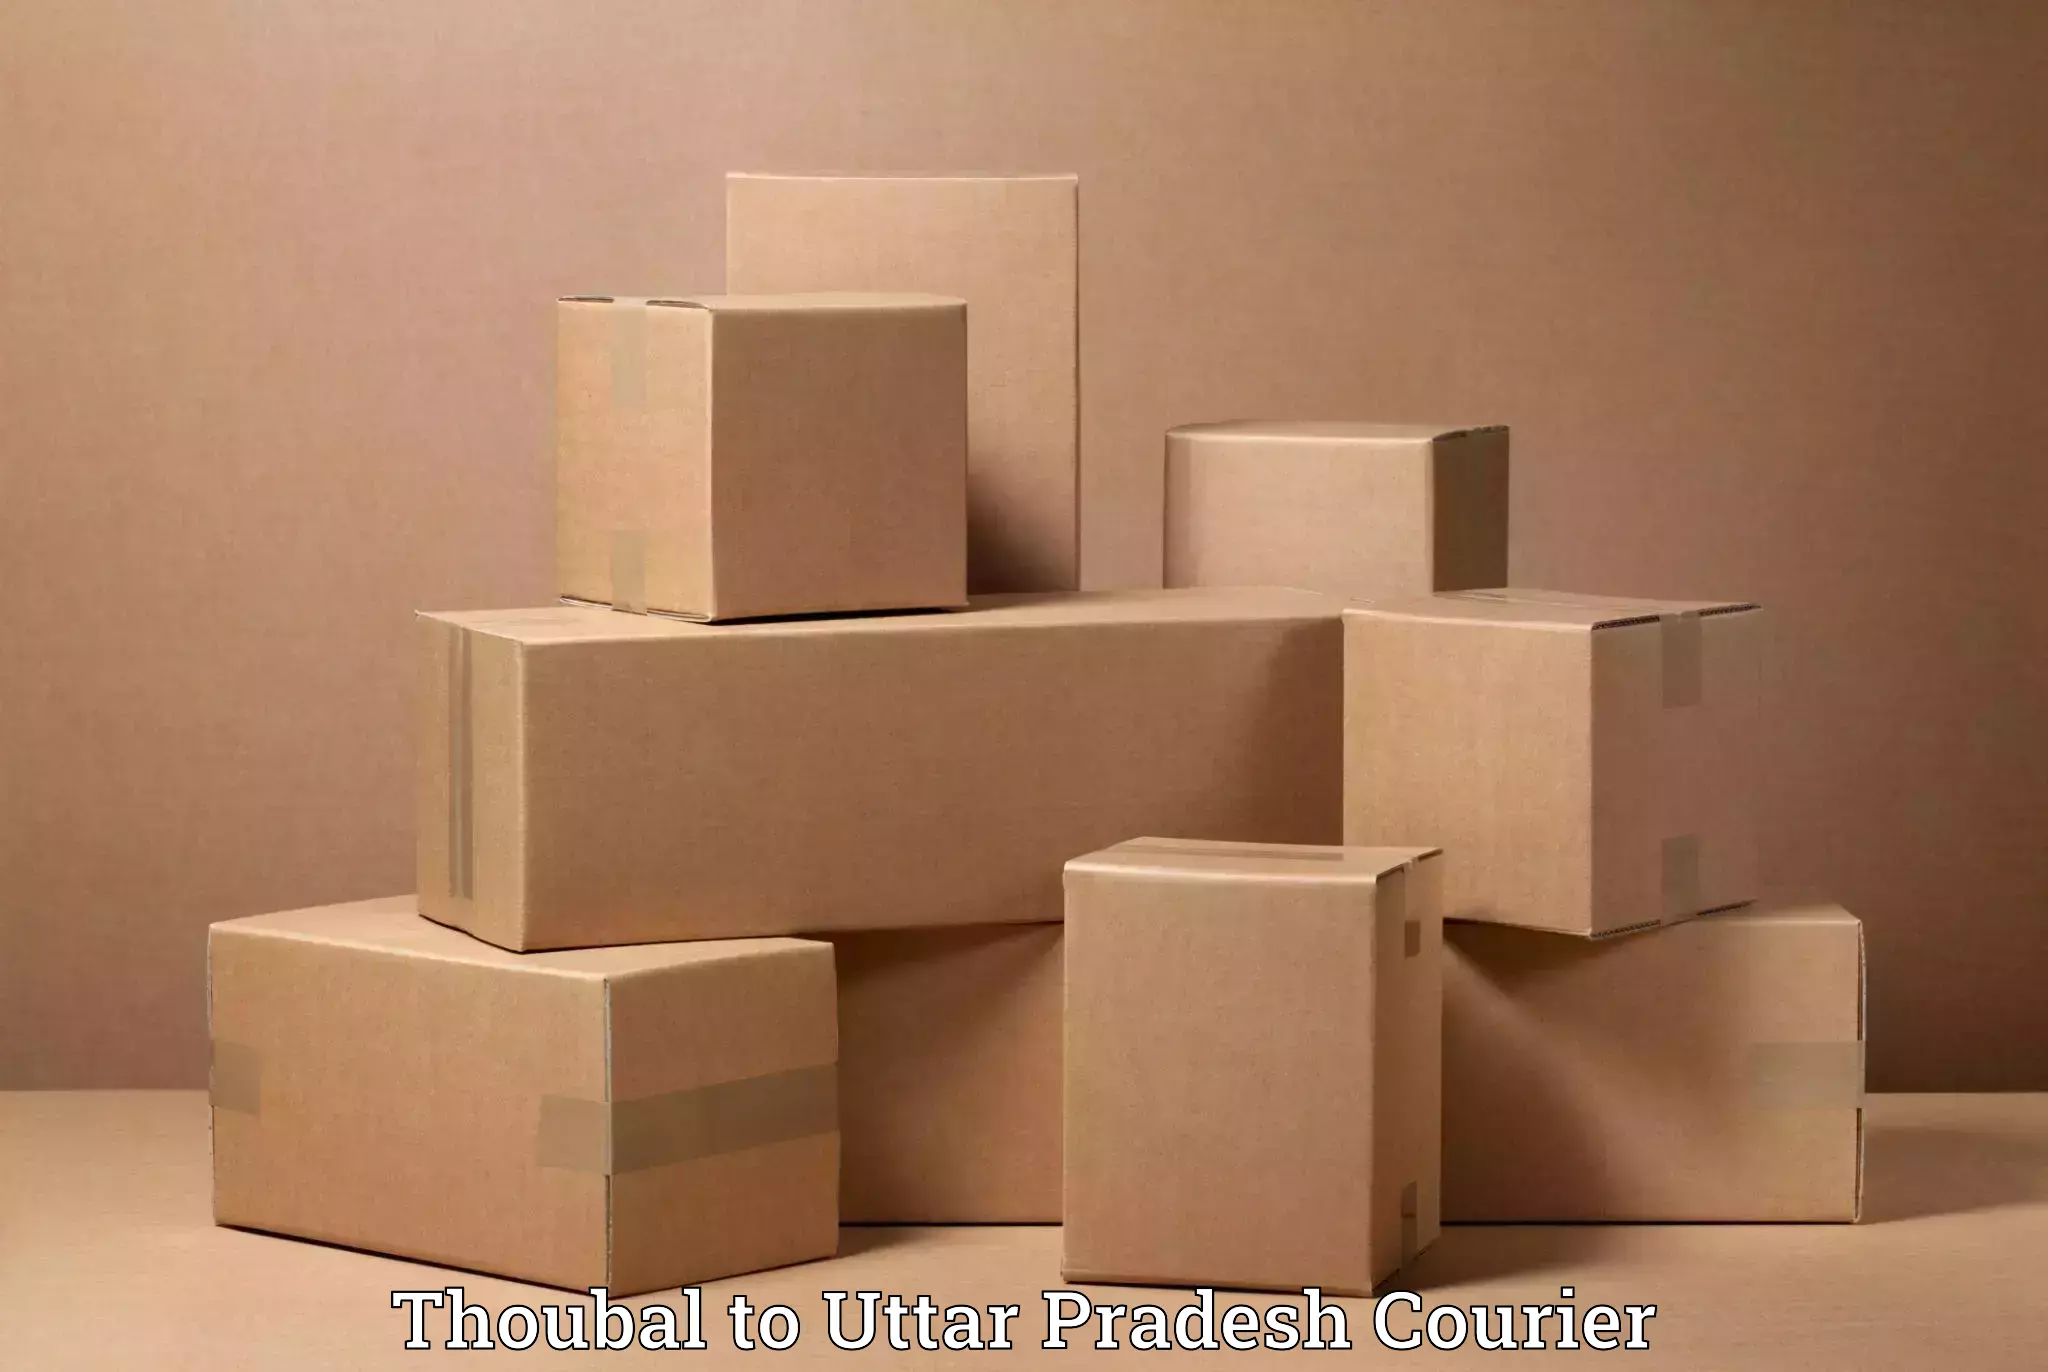 Furniture moving experts Thoubal to Fatehpur